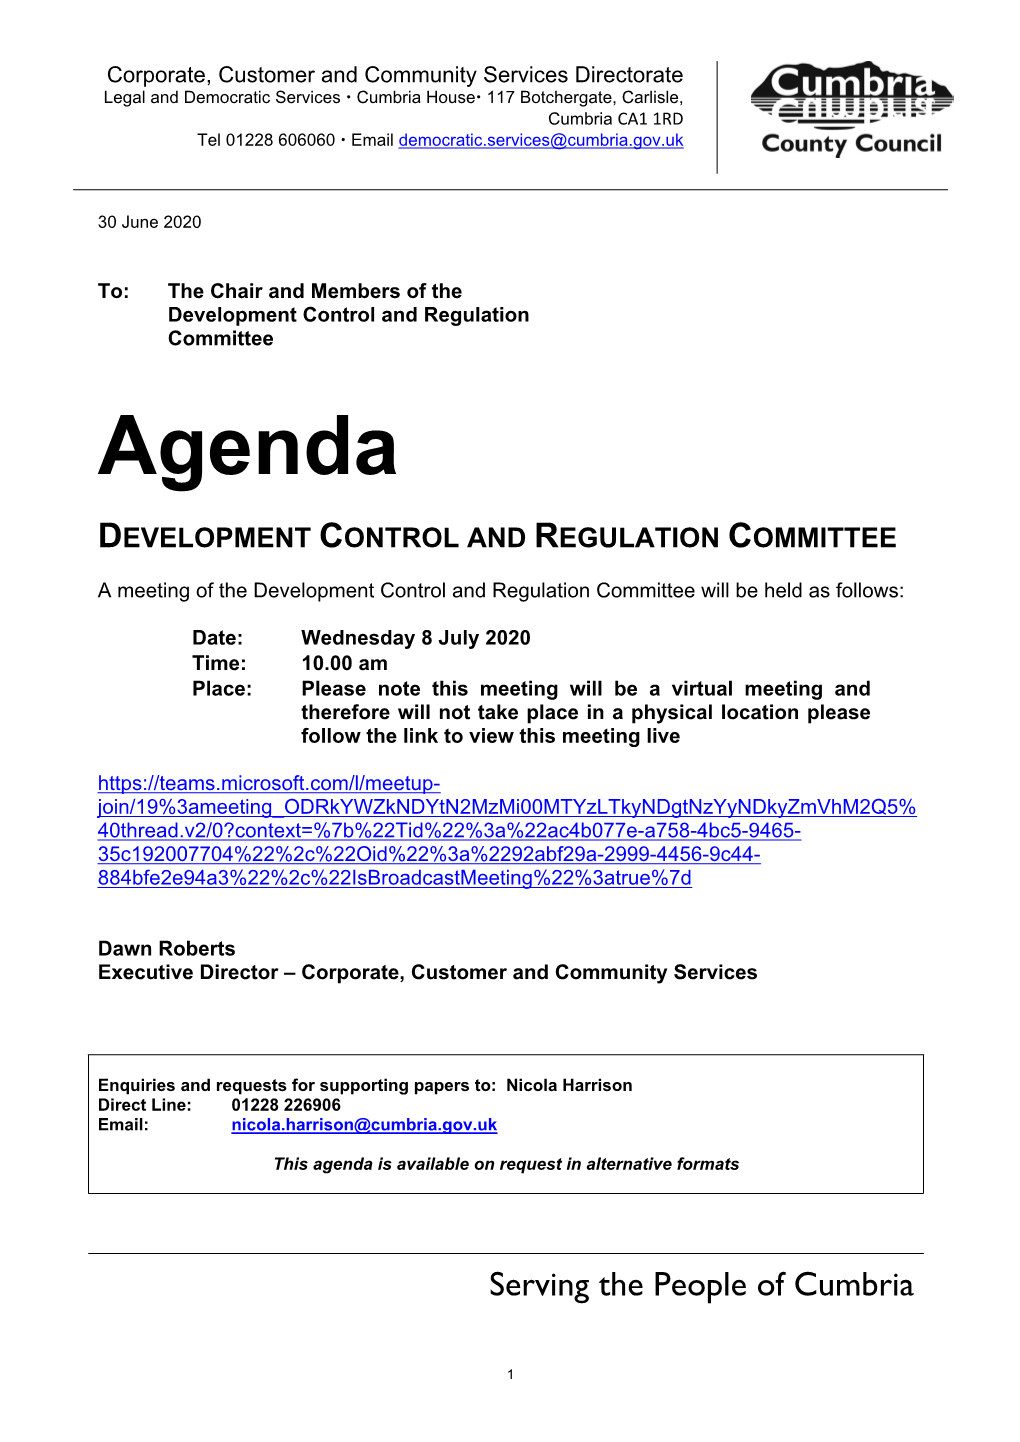 Agenda Document for Development Control and Regulation Committee